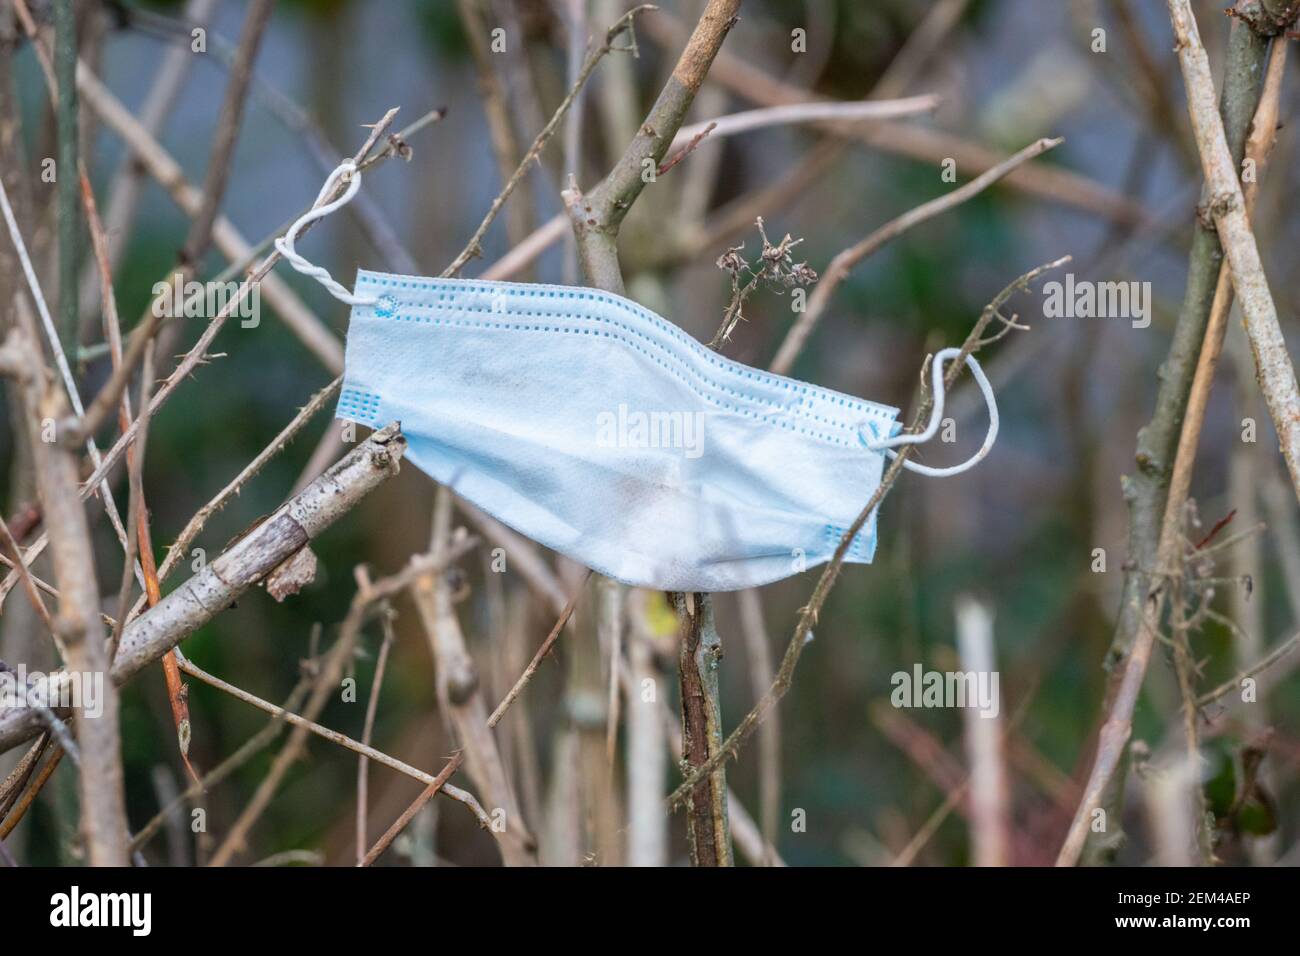 Disposable blue pleated face mask litter seen discarded on branches in England, UK during coronavirus covid-19 pandemic. Litter, rubbish, waste. Stock Photo